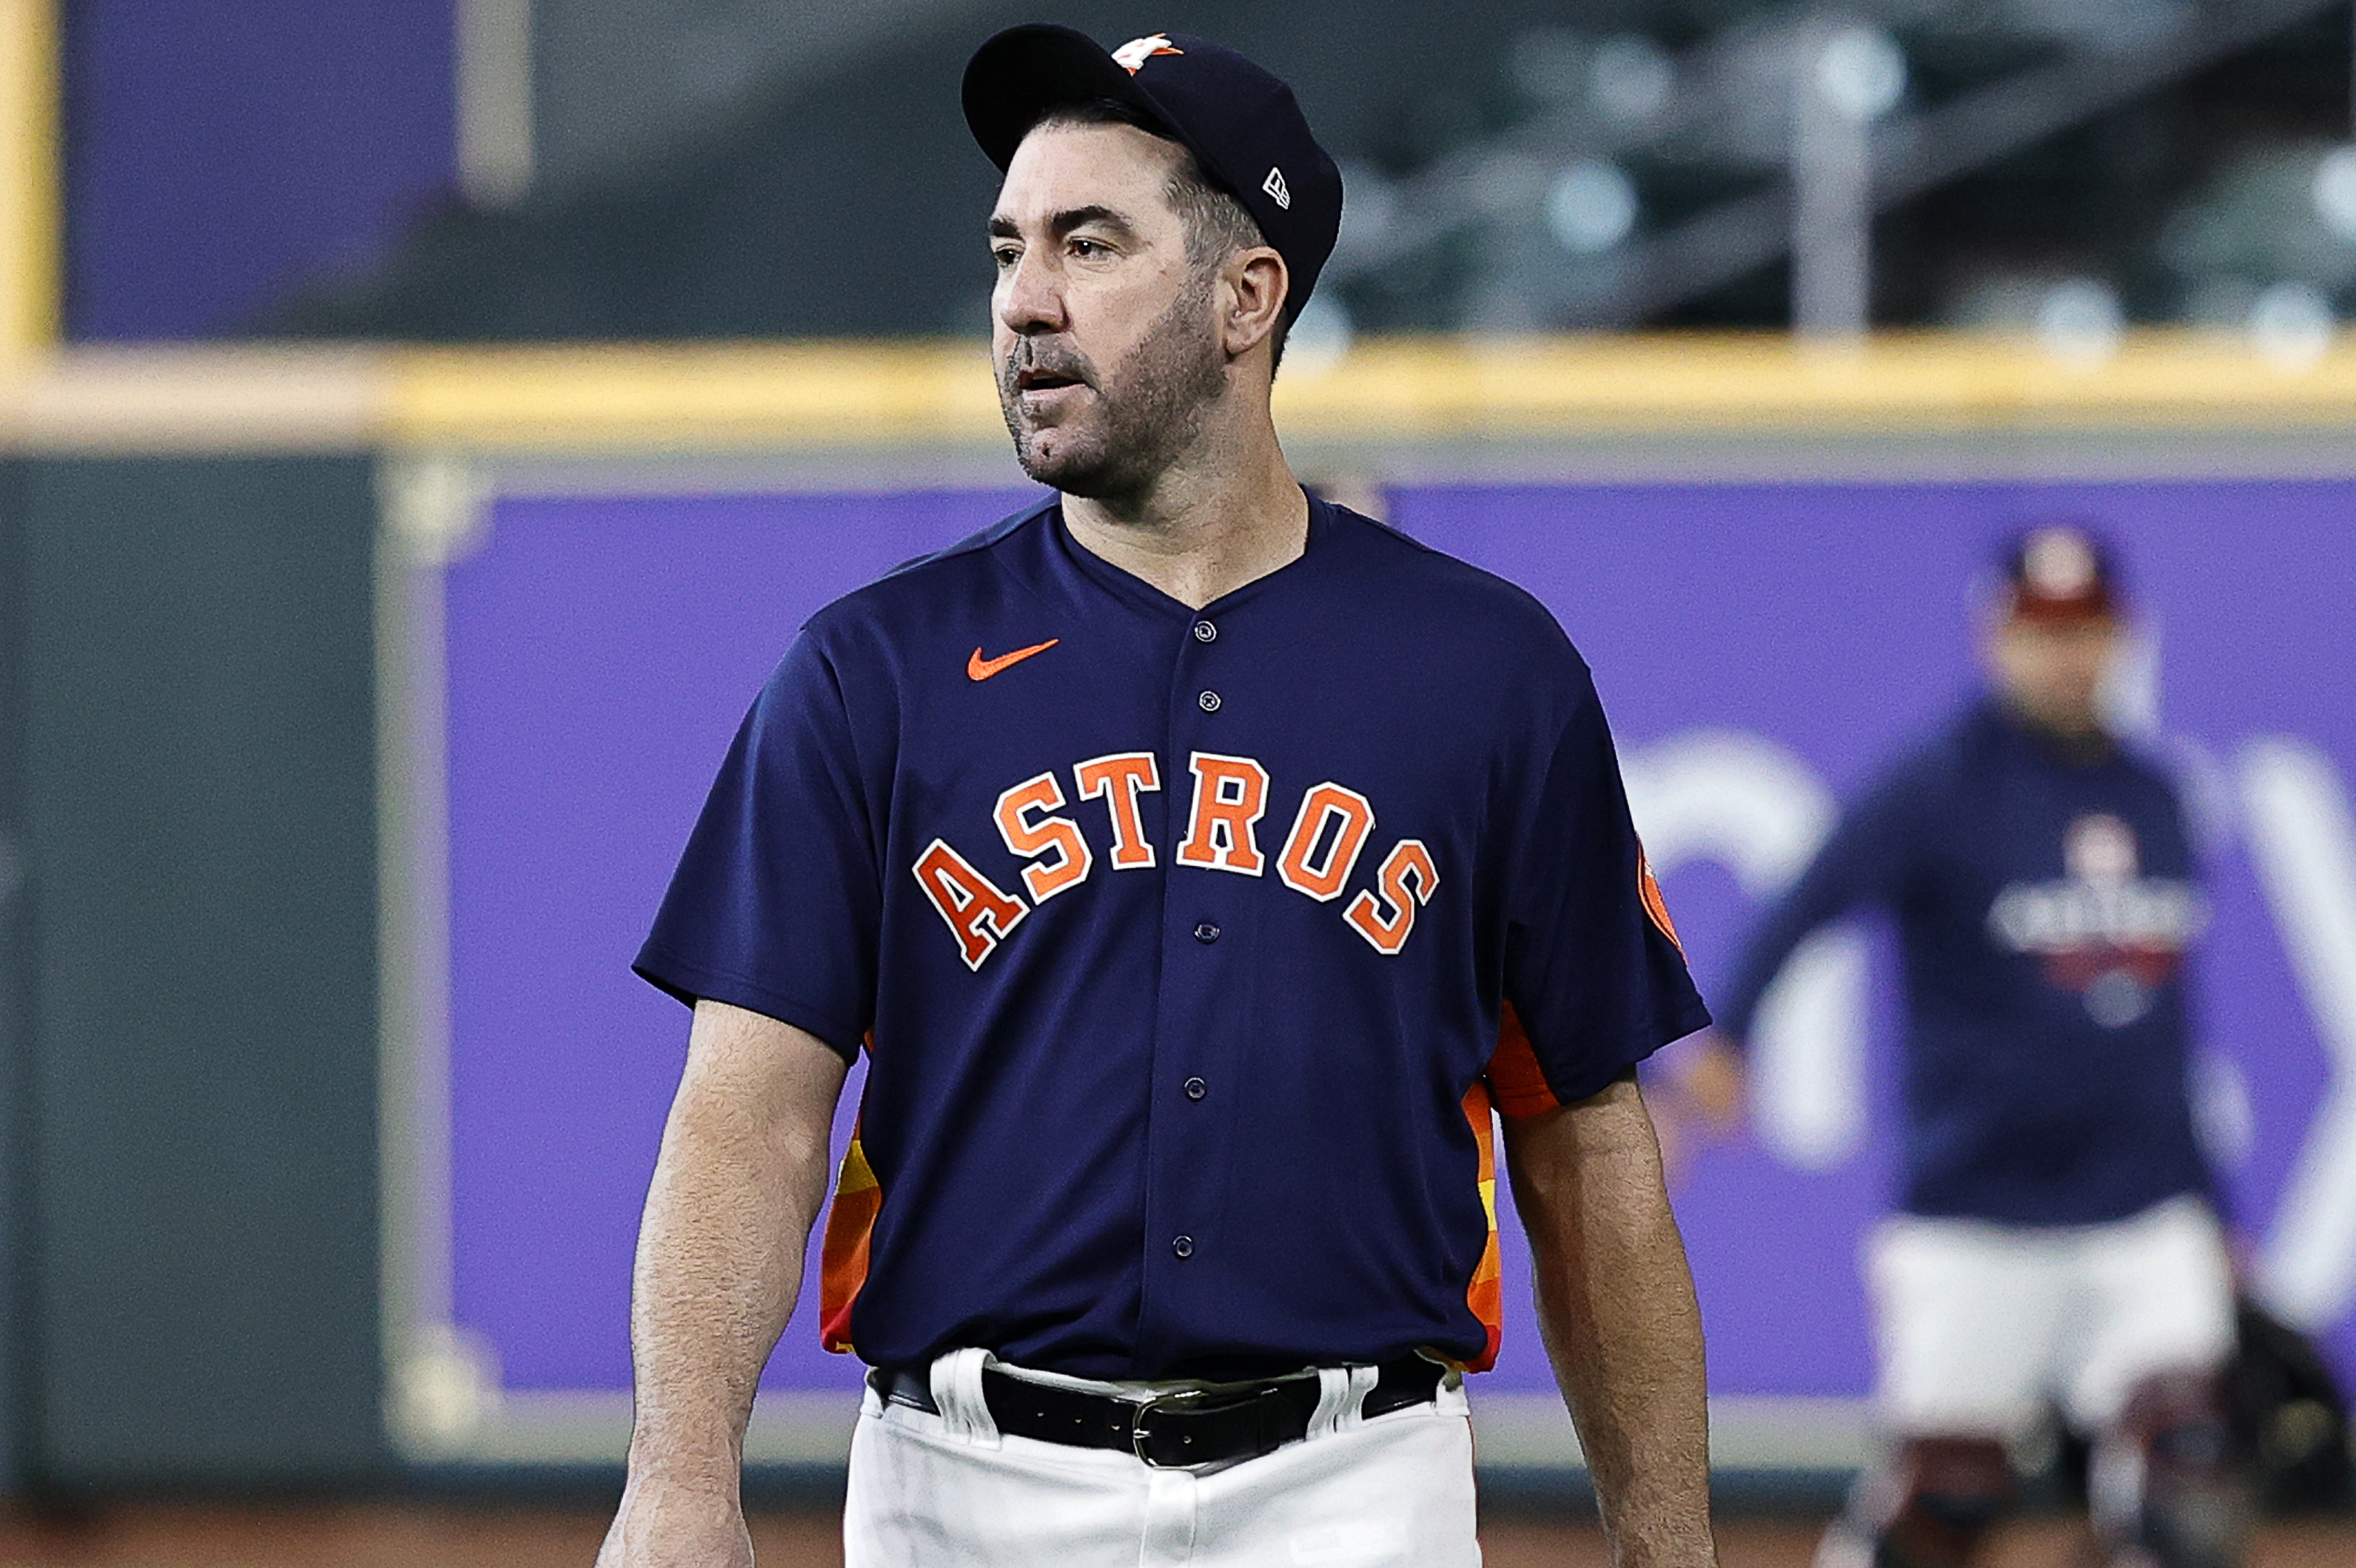 Reports: Justin Verlander signs 2-year, $86M deal with New York